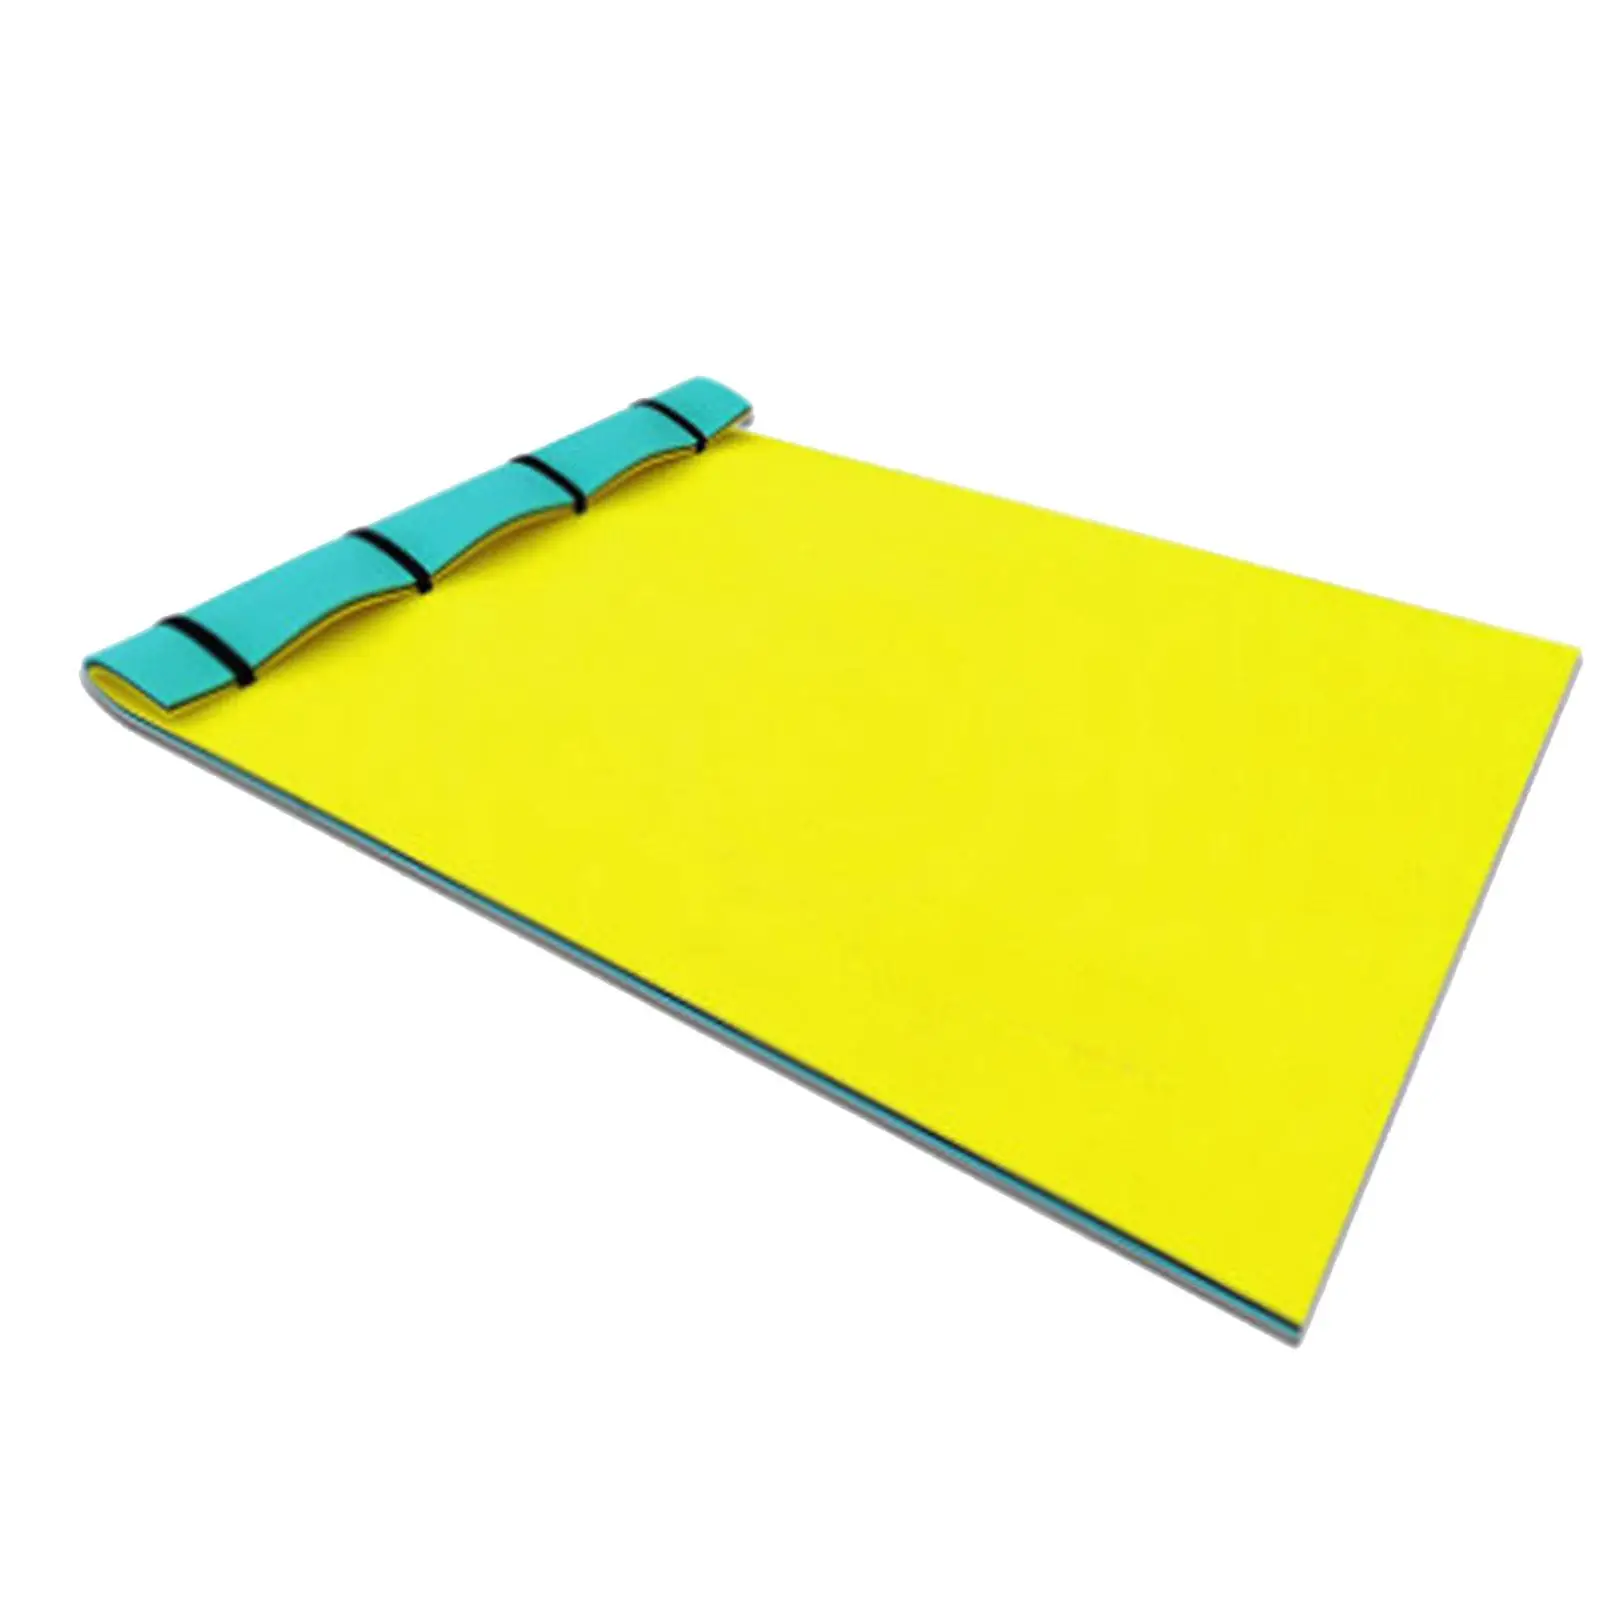 Water Floating Mat High Density Xpe Foam Floating Pad for Beach River Summer